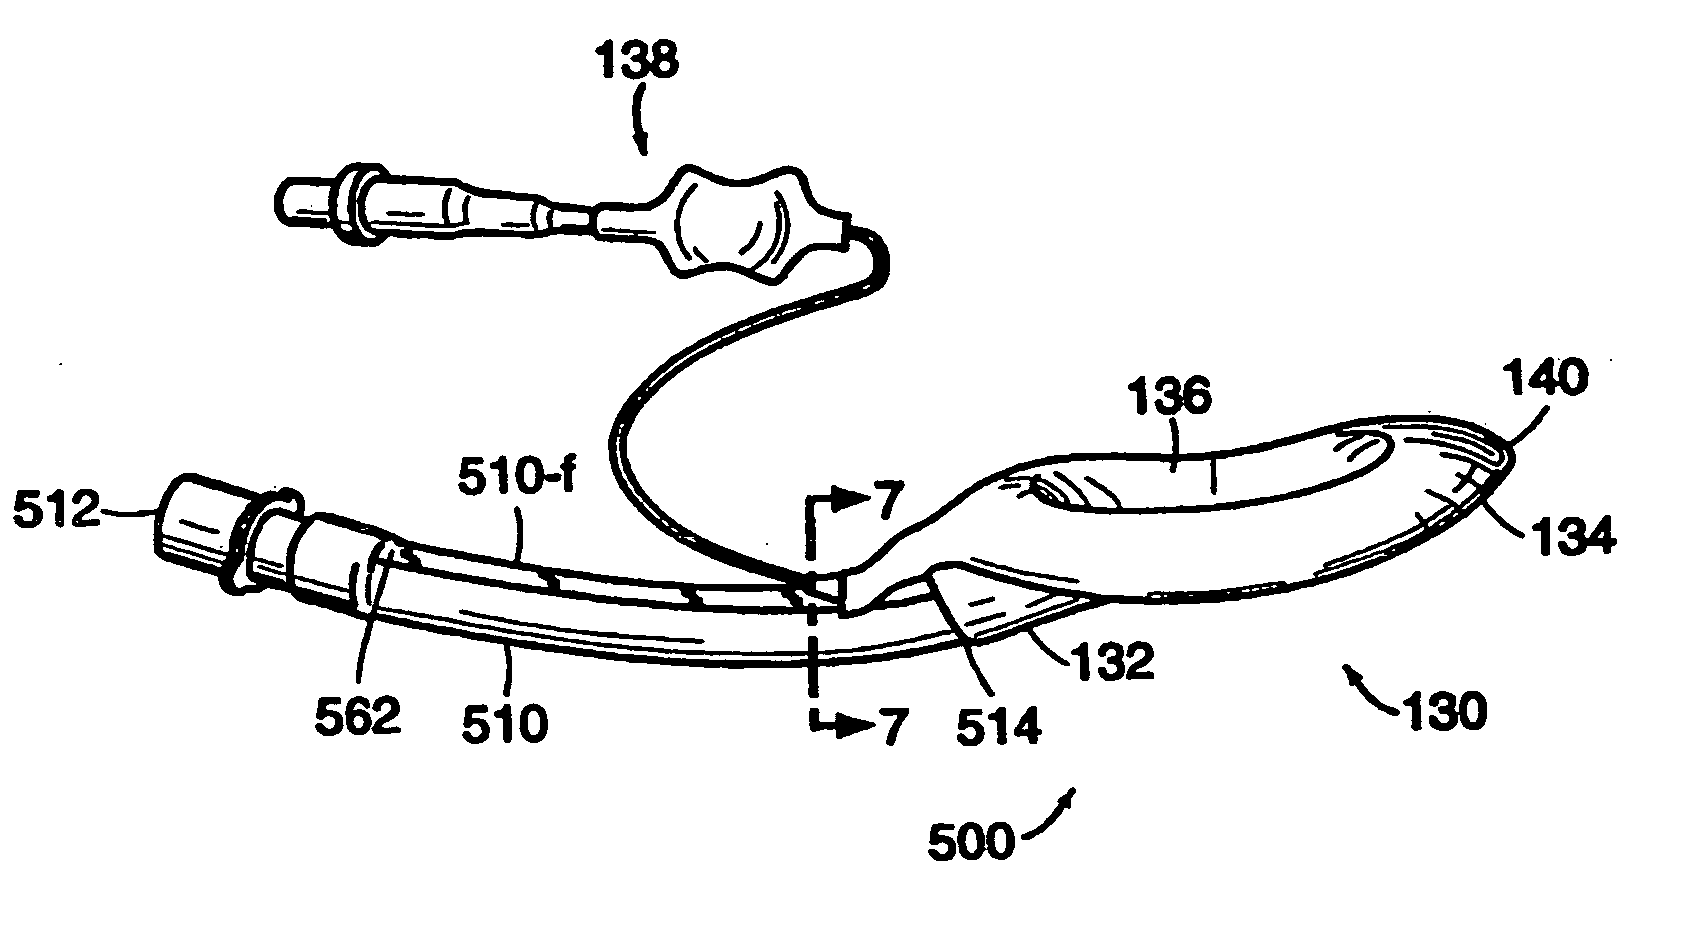 Laryngeal mask airway device with airway tube having flattened outer circumference and elliptical inner airway passage